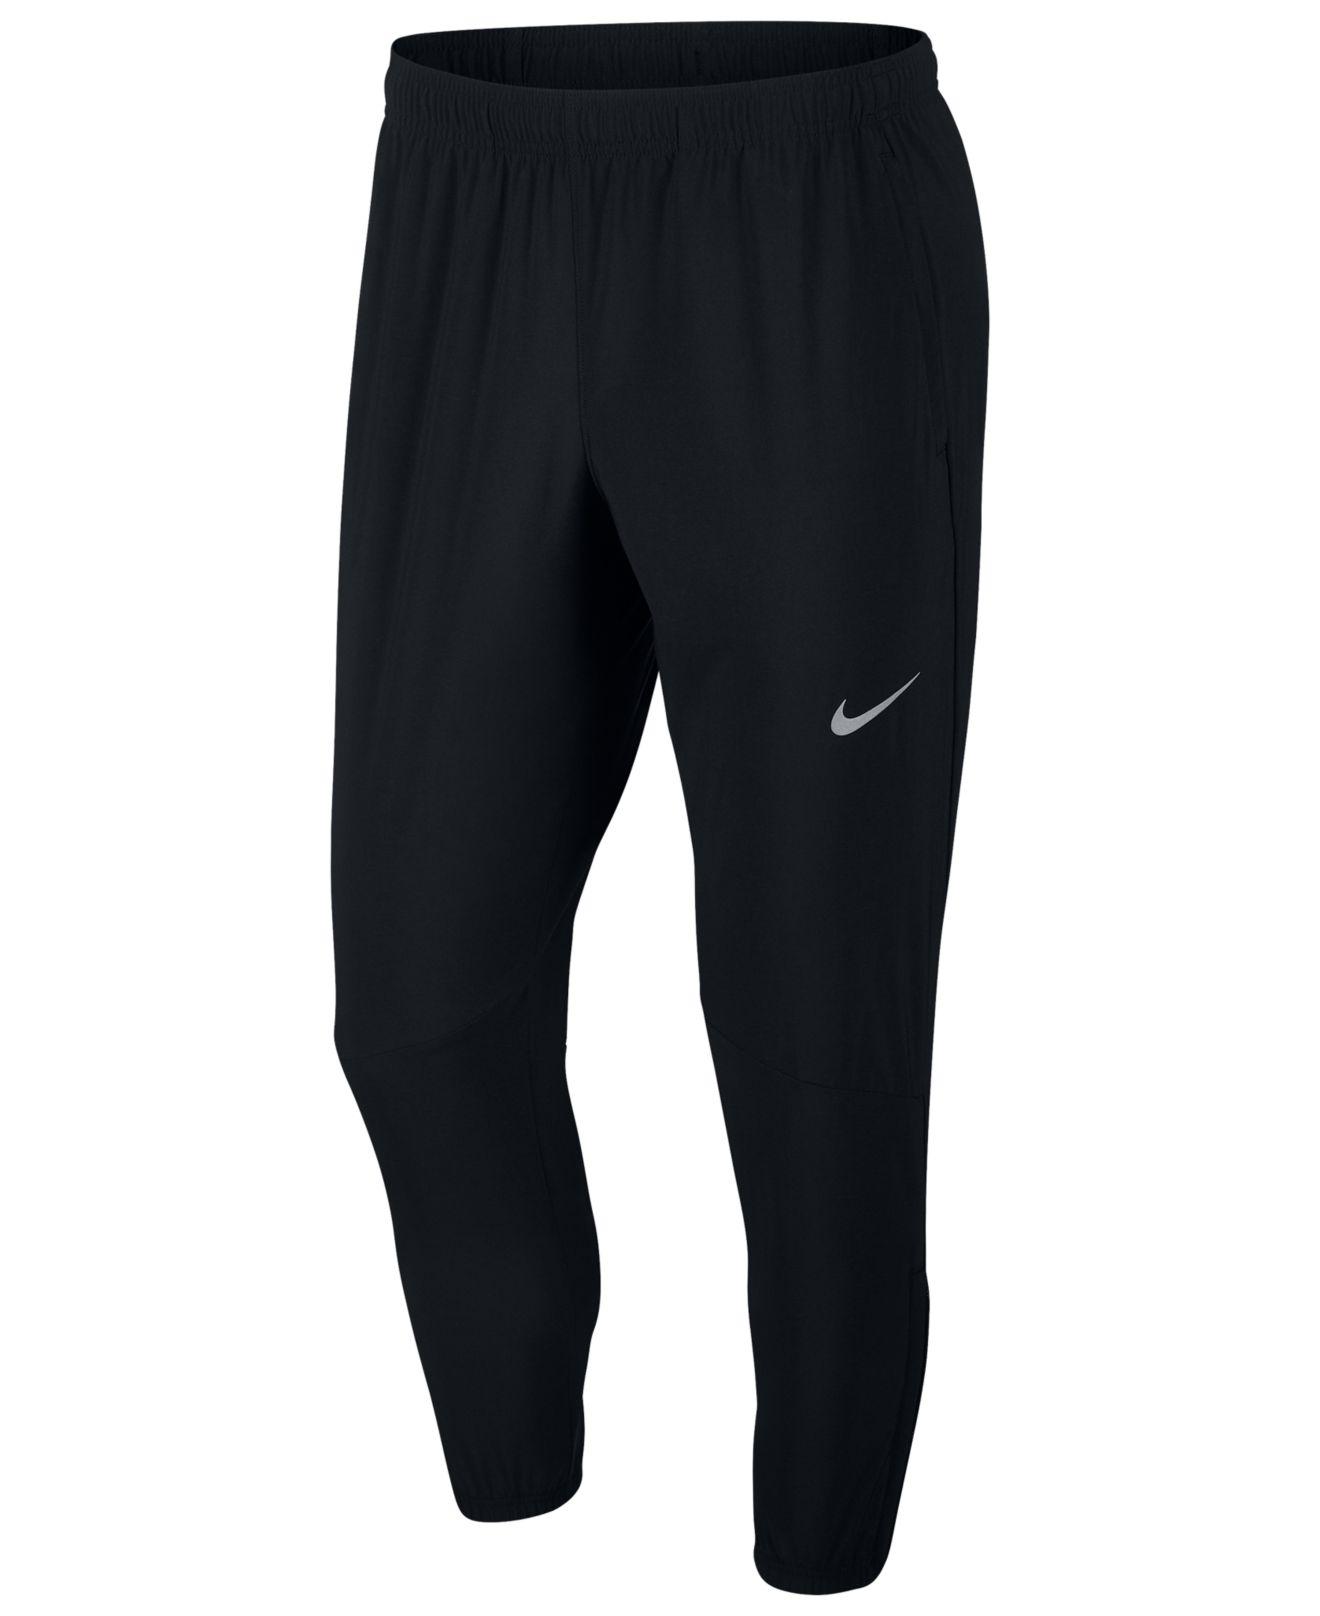 Nike Synthetic Phenom Dri-fit Running Pants in Black for Men - Lyst